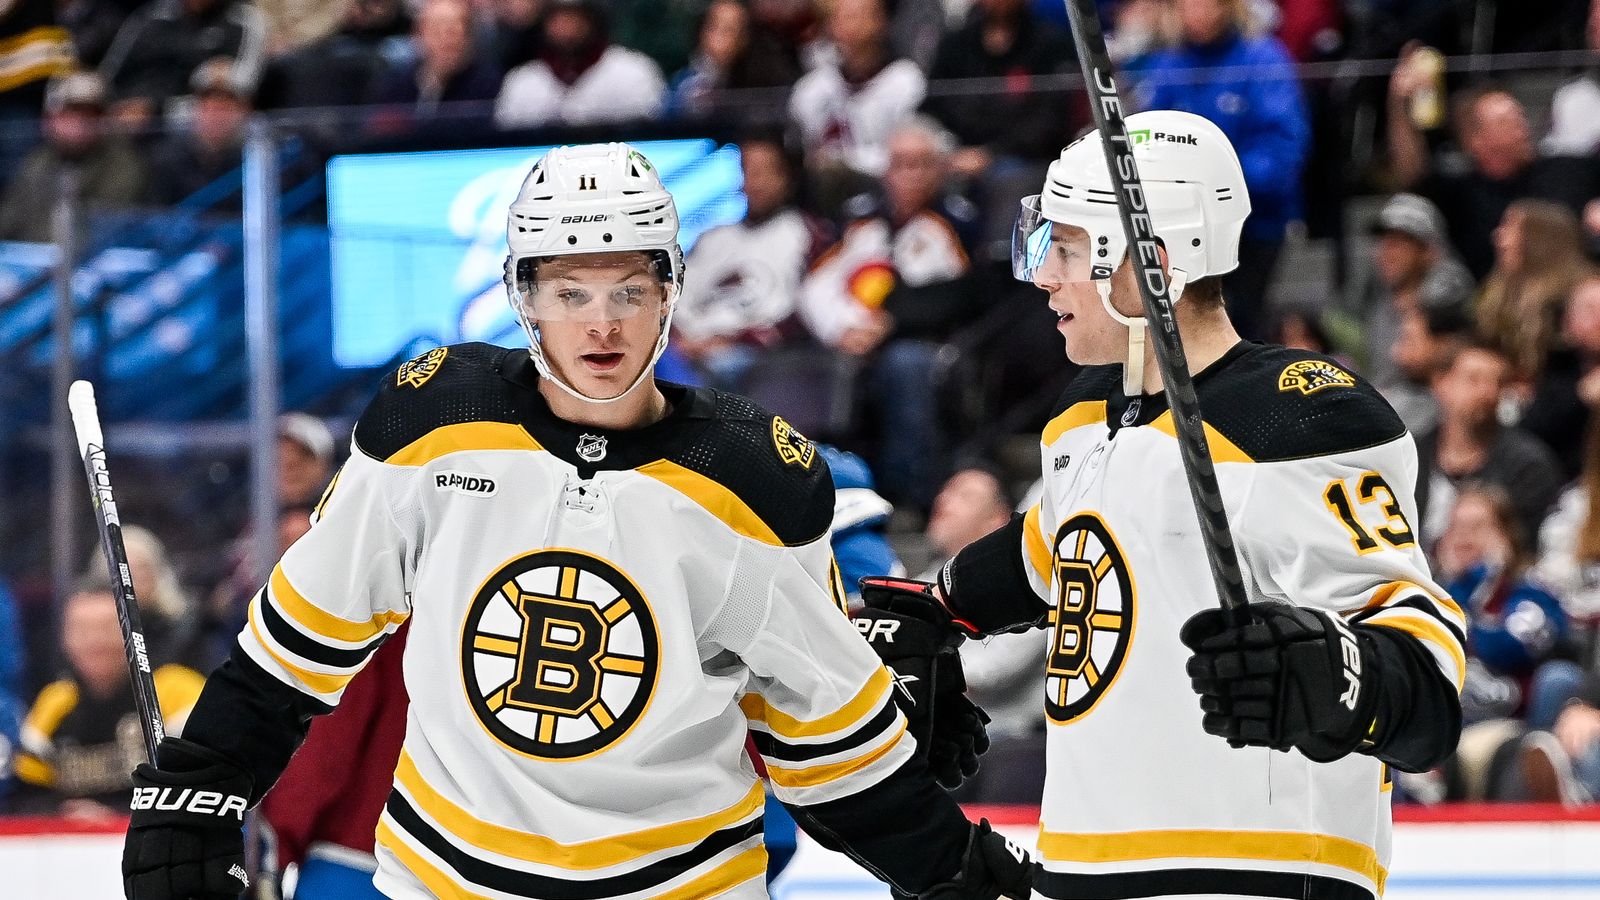 Bruins prospect Trent Frederic emerges as reliable two-way forward